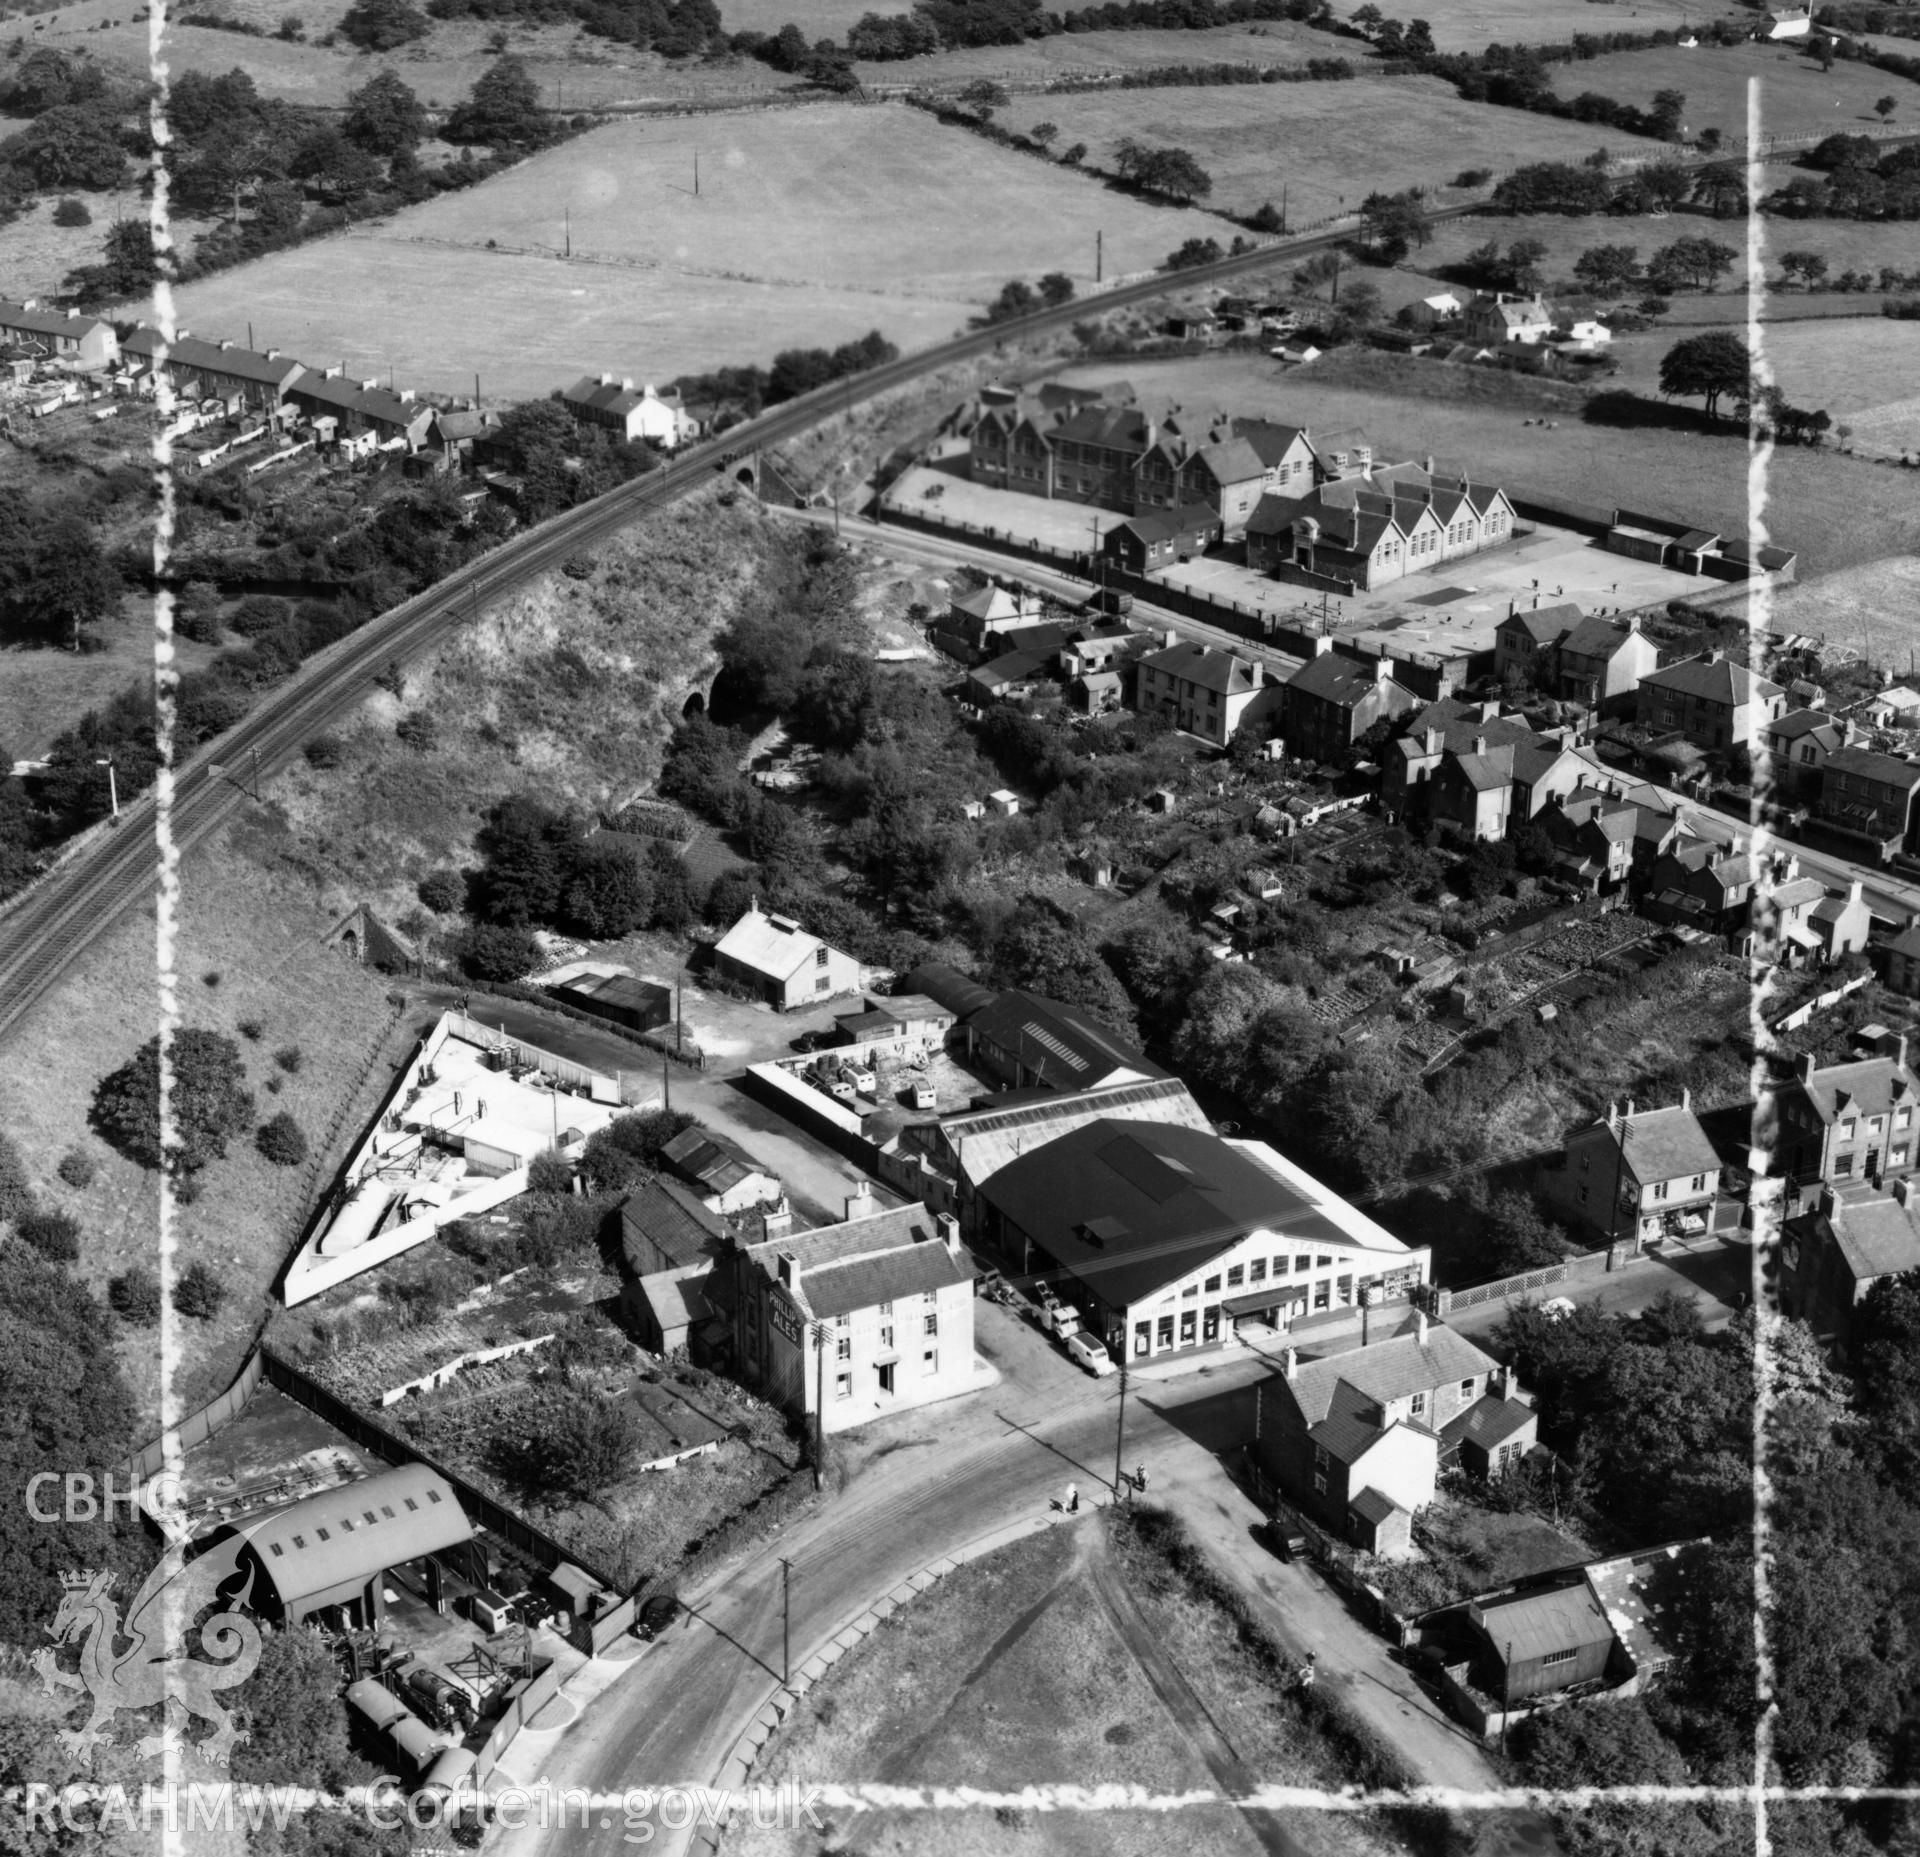 View of Gibbs Brothers garage at Pontllanfraith, also showing schools. Oblique aerial photograph, 5?" cut roll film.